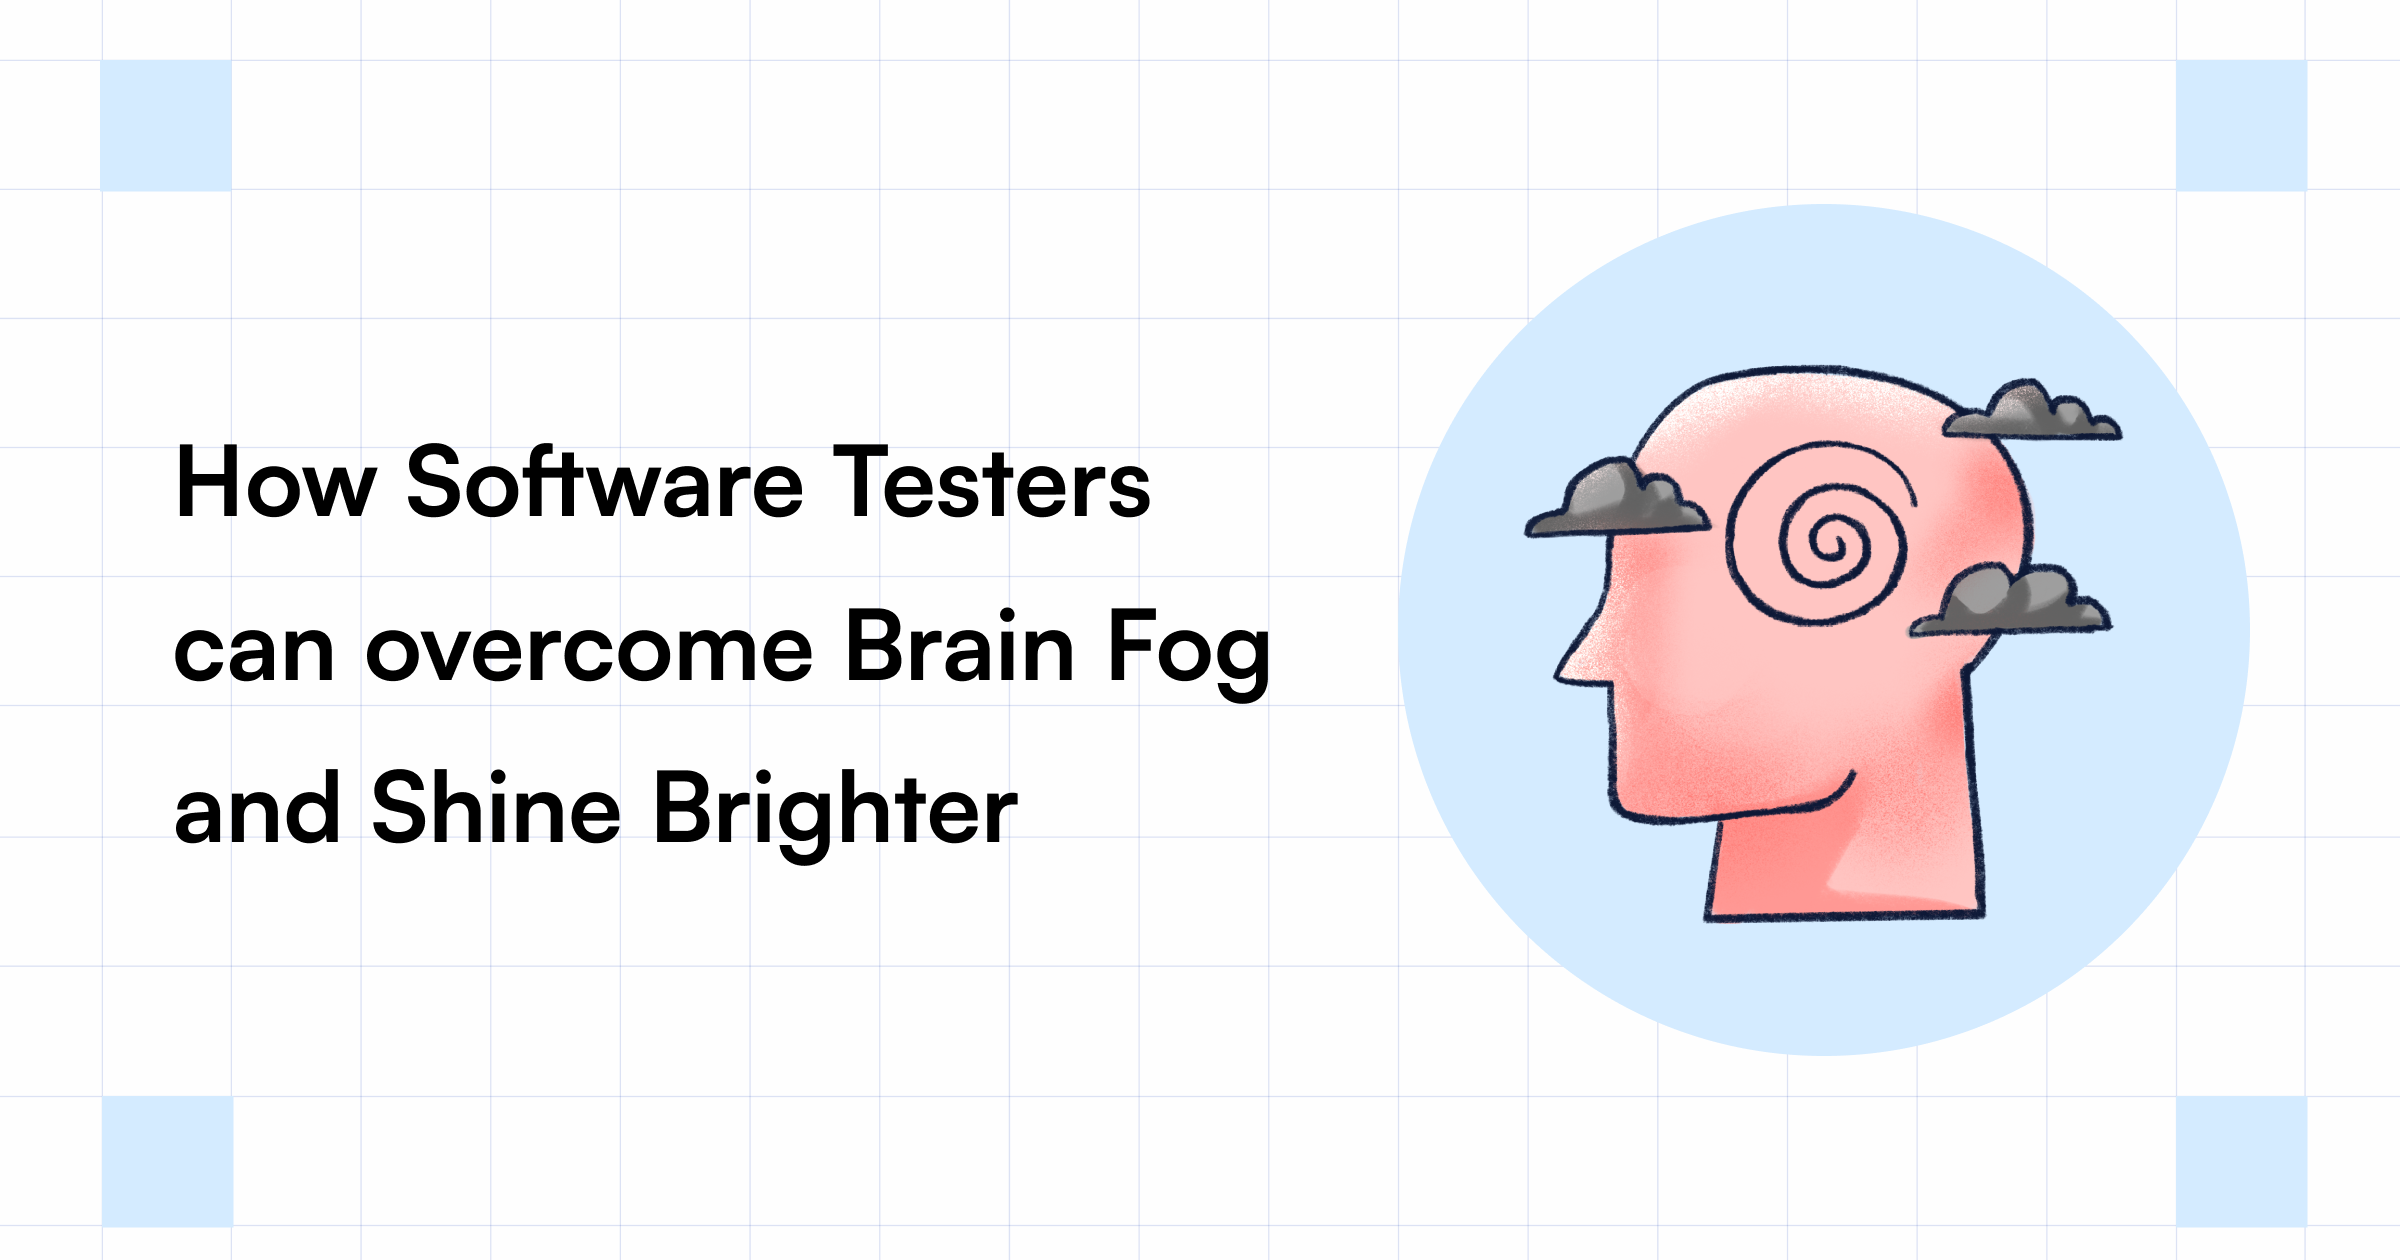 How Software Testers can overcome Brain Fog and Shine Brighter